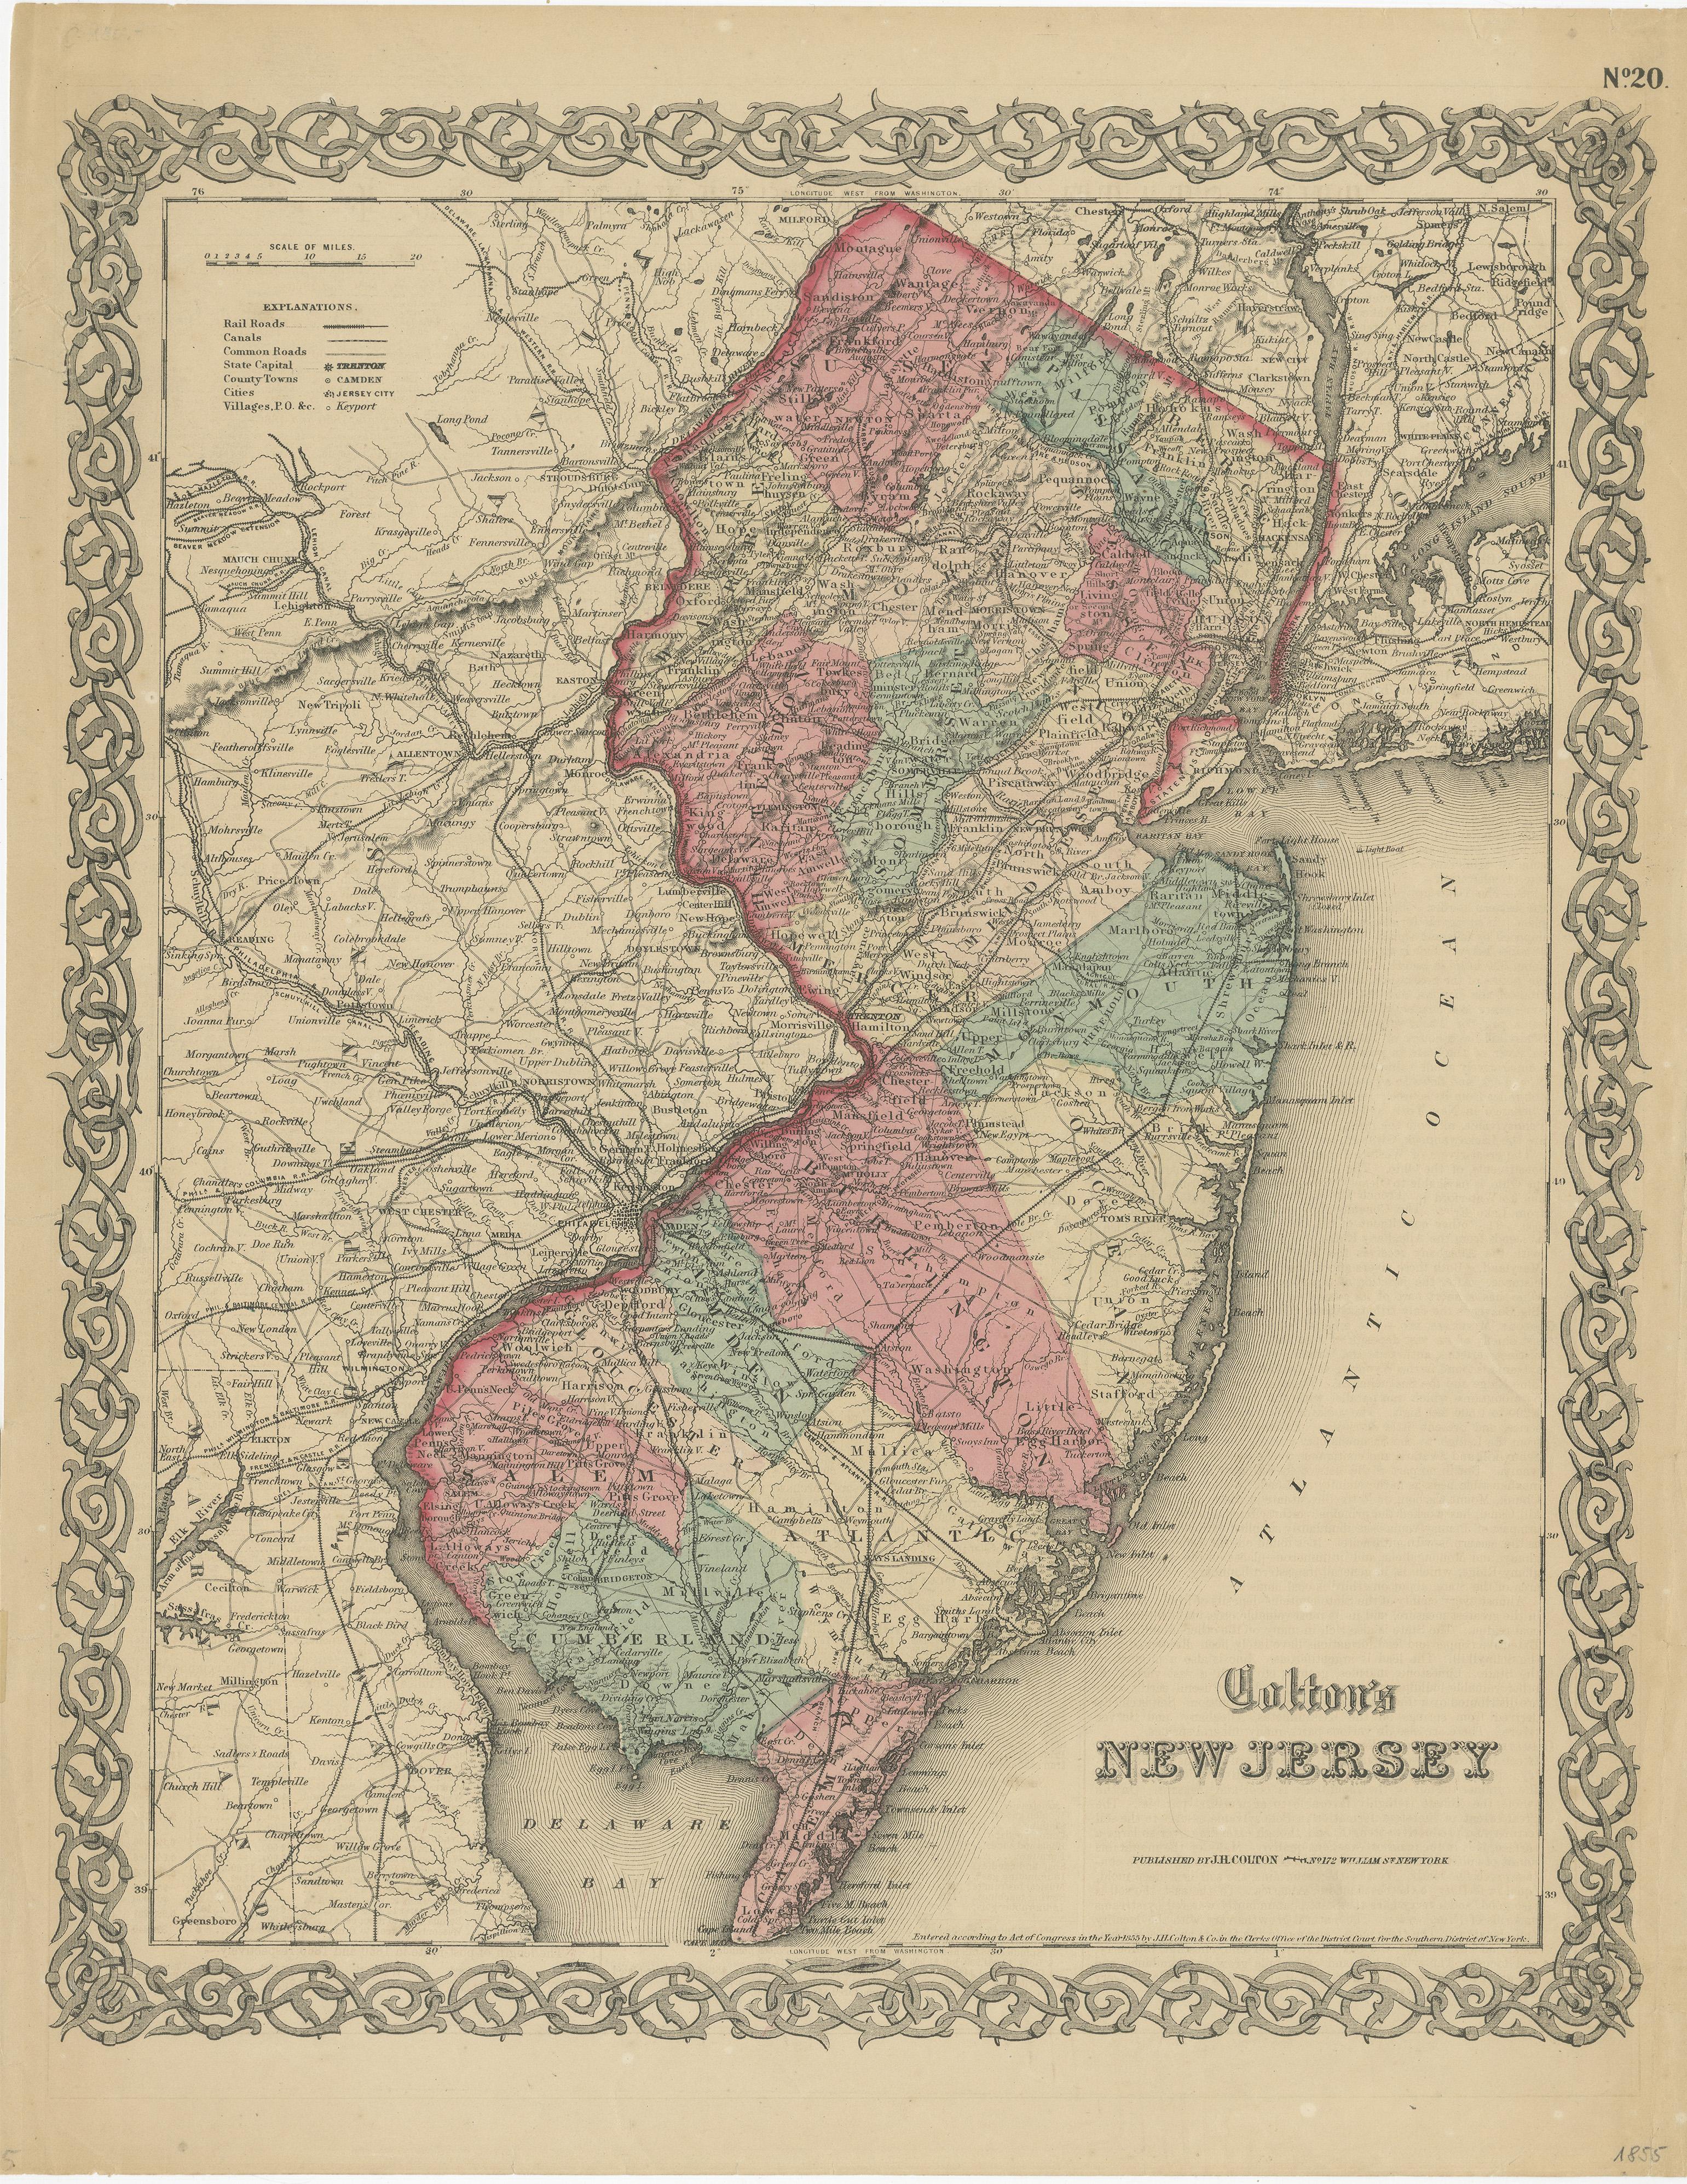 Antique map titled 'Colton's New Jersey'. This rare hand colored map of New Jersey is a copper plate engraving dating to 1855. Produced by the important mid 19th century American map publisher J. H. Colton. Covers the region in considerable detail,